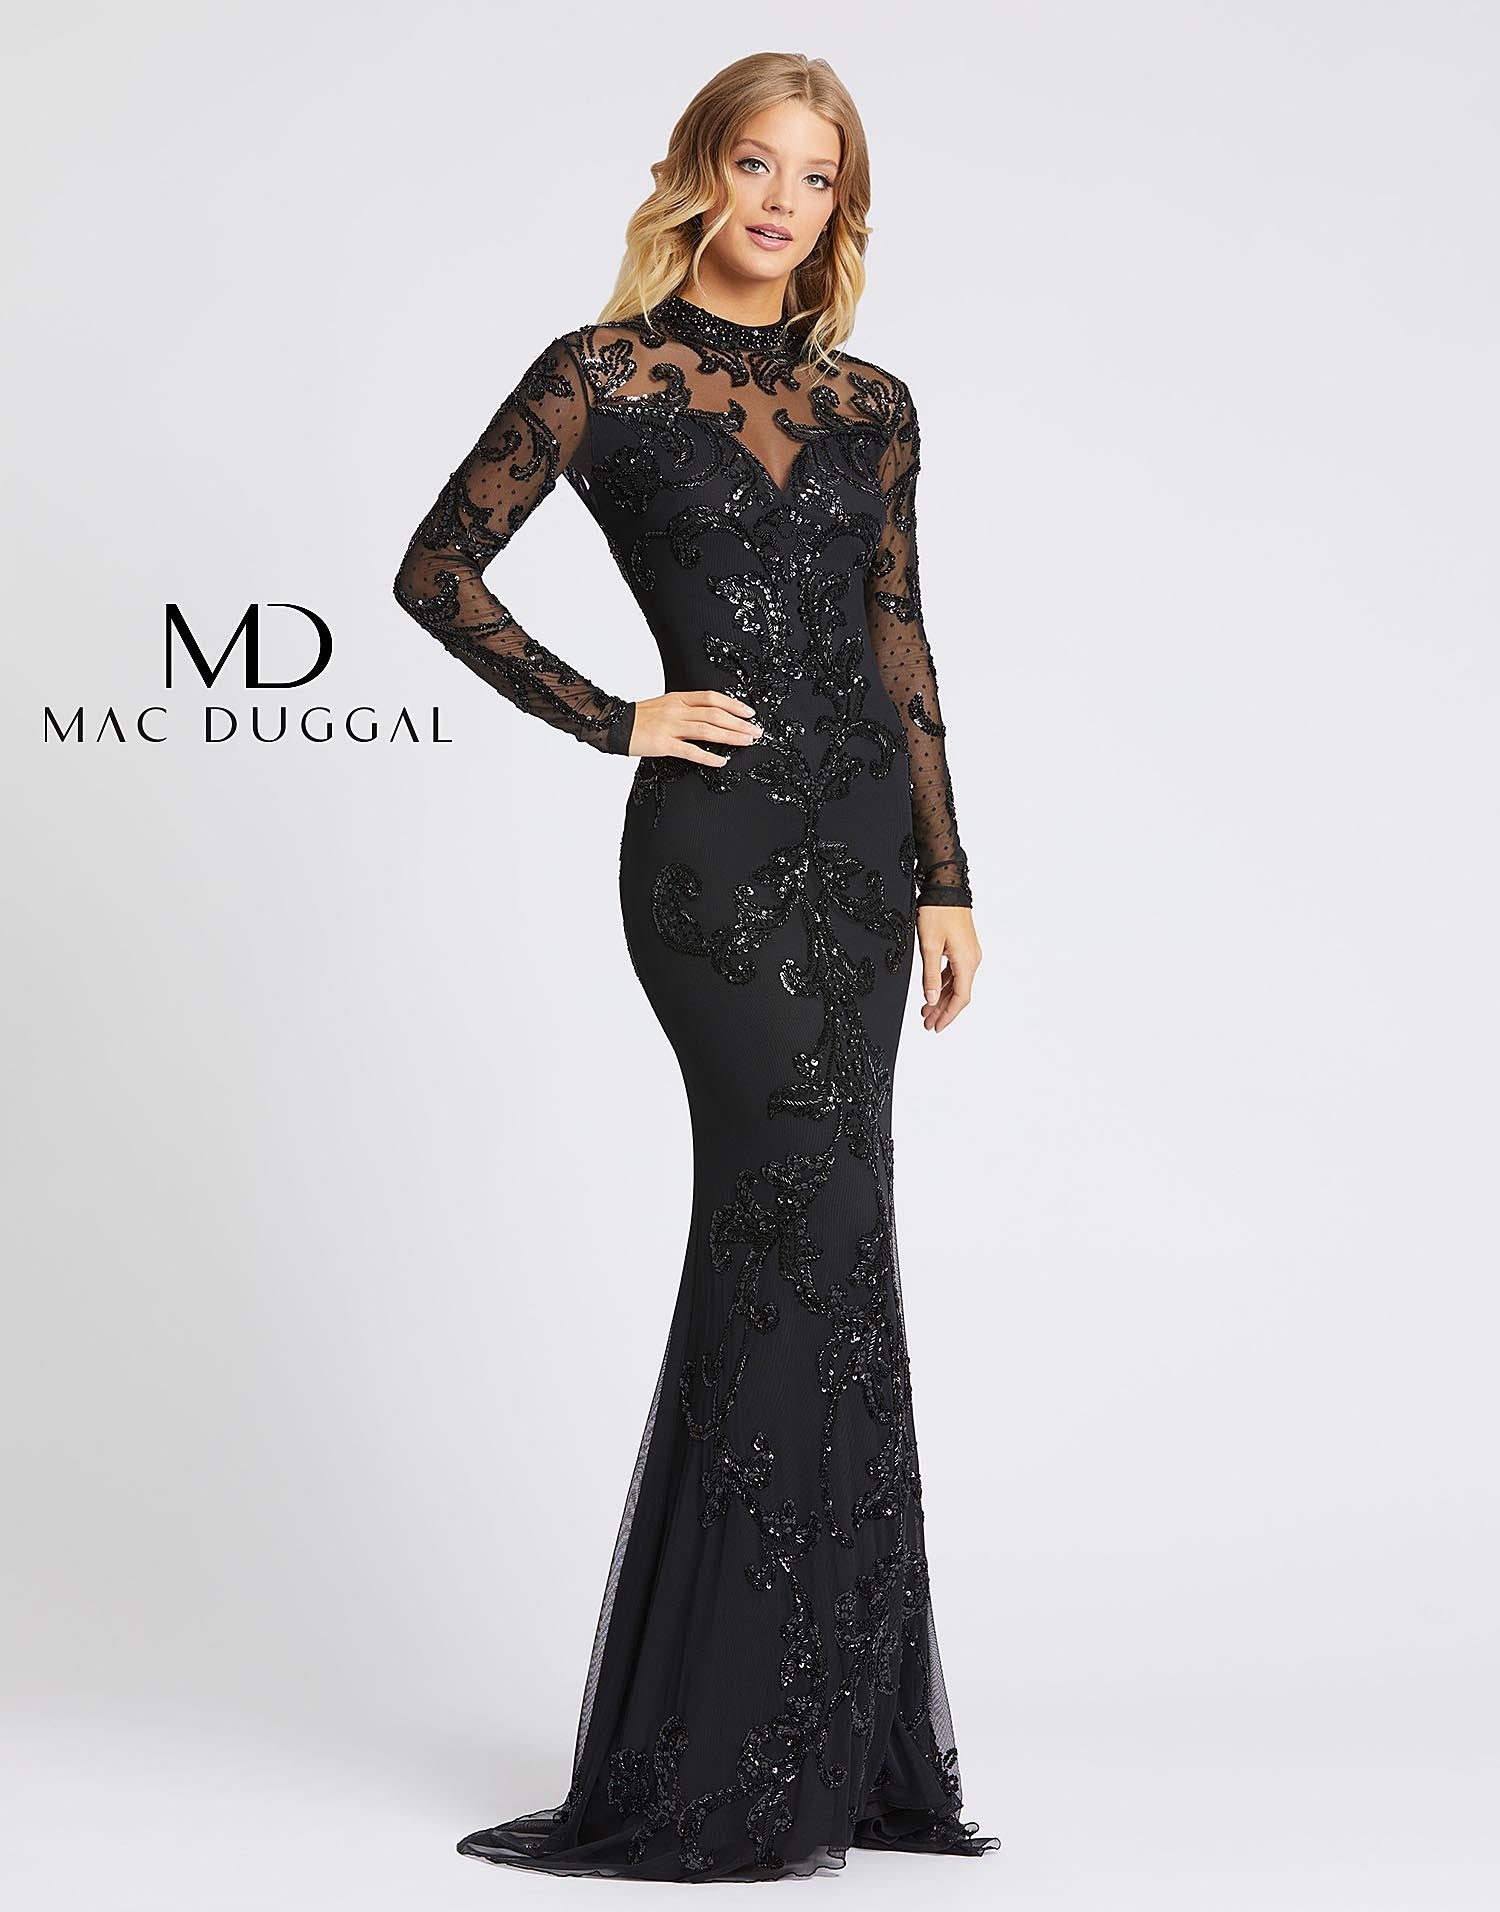 Mac Duggal Cassandra Stone 1945A is a Long Fitted Formal evening gown. Featuring speckle lace fitted long sheer sleeves with a sheer high neckline. embellished with beading & sequins. All you could ever ask for in a dress! Style 1945A has beautiful beading and an overlay of lace that gives off the impression of a sweetheart neckline. This long sleeved gown has an open back and flows into a subtle train Available Sizes: 0,2,4,6,8,10,12  Available Colors: Black